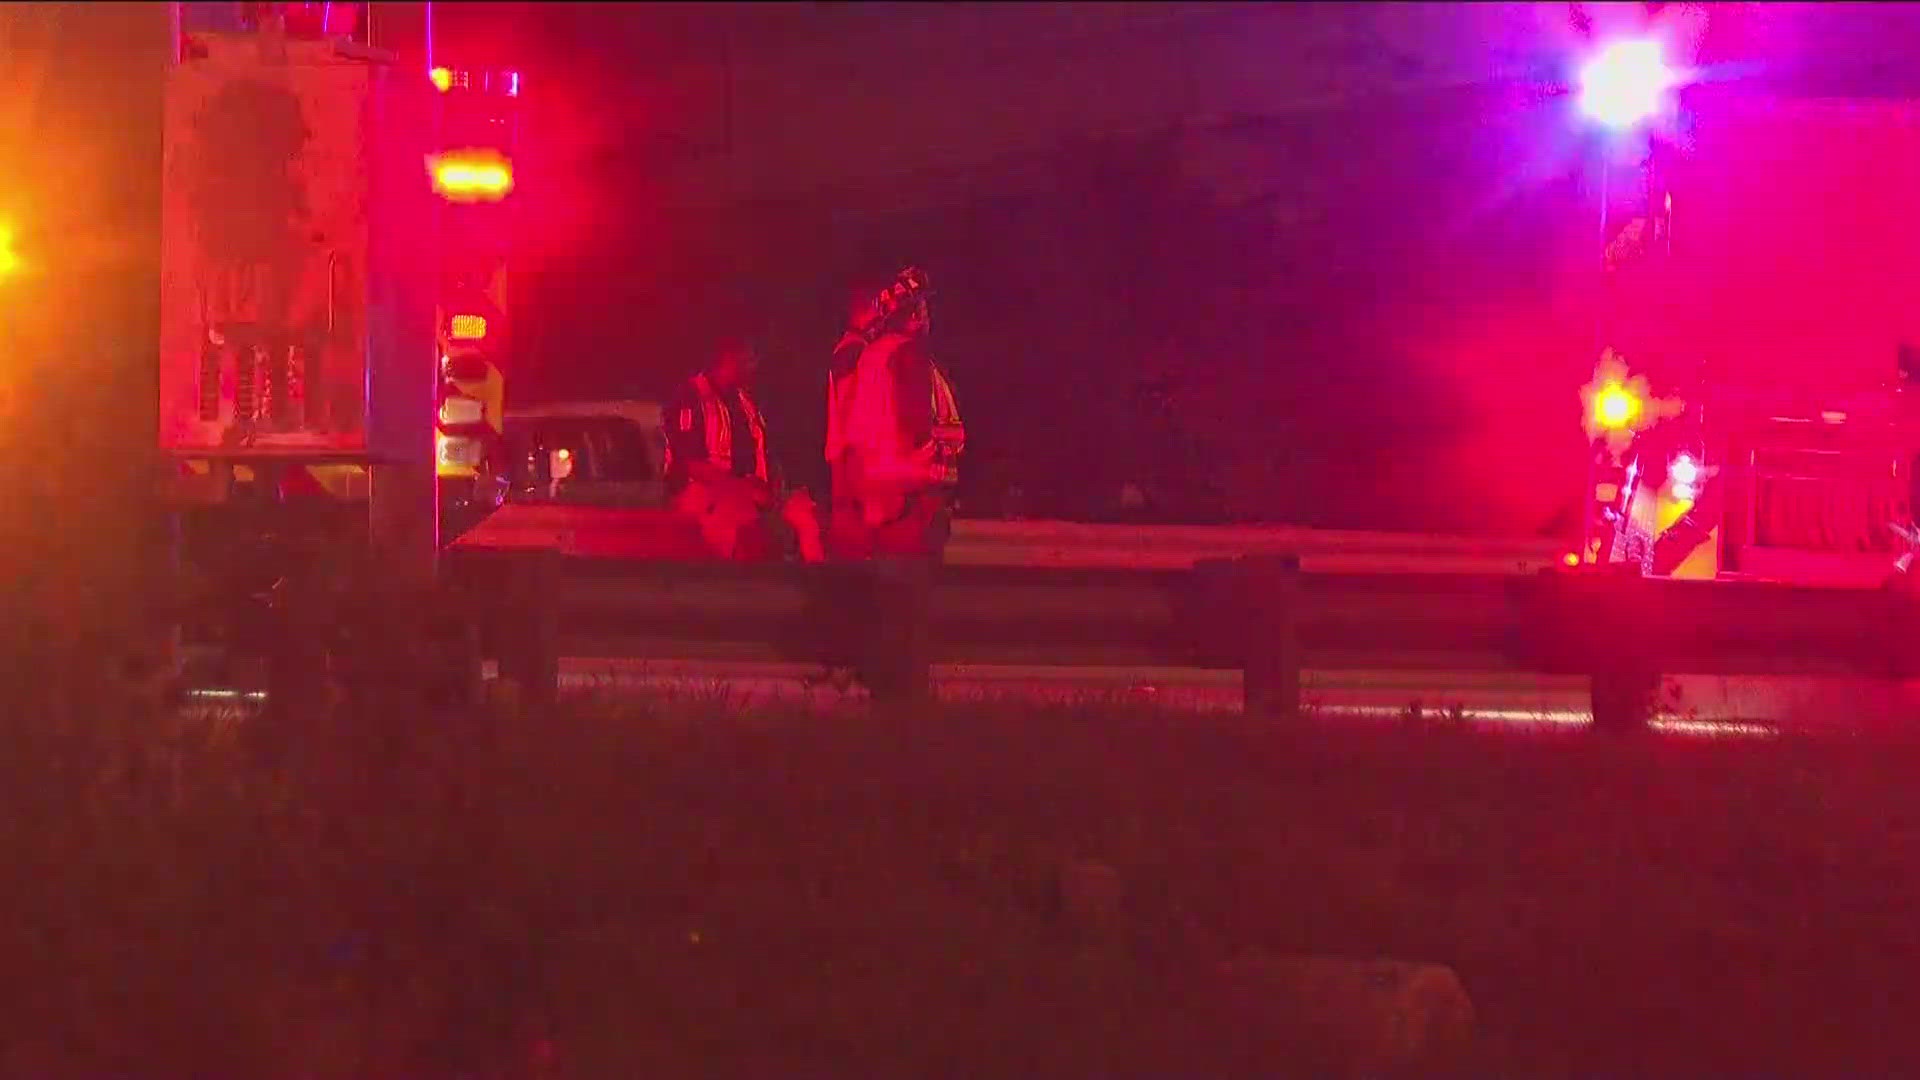 A person is dead after a crash on Georgia 400 southbound in Atlanta on Wednesday evening, police said.